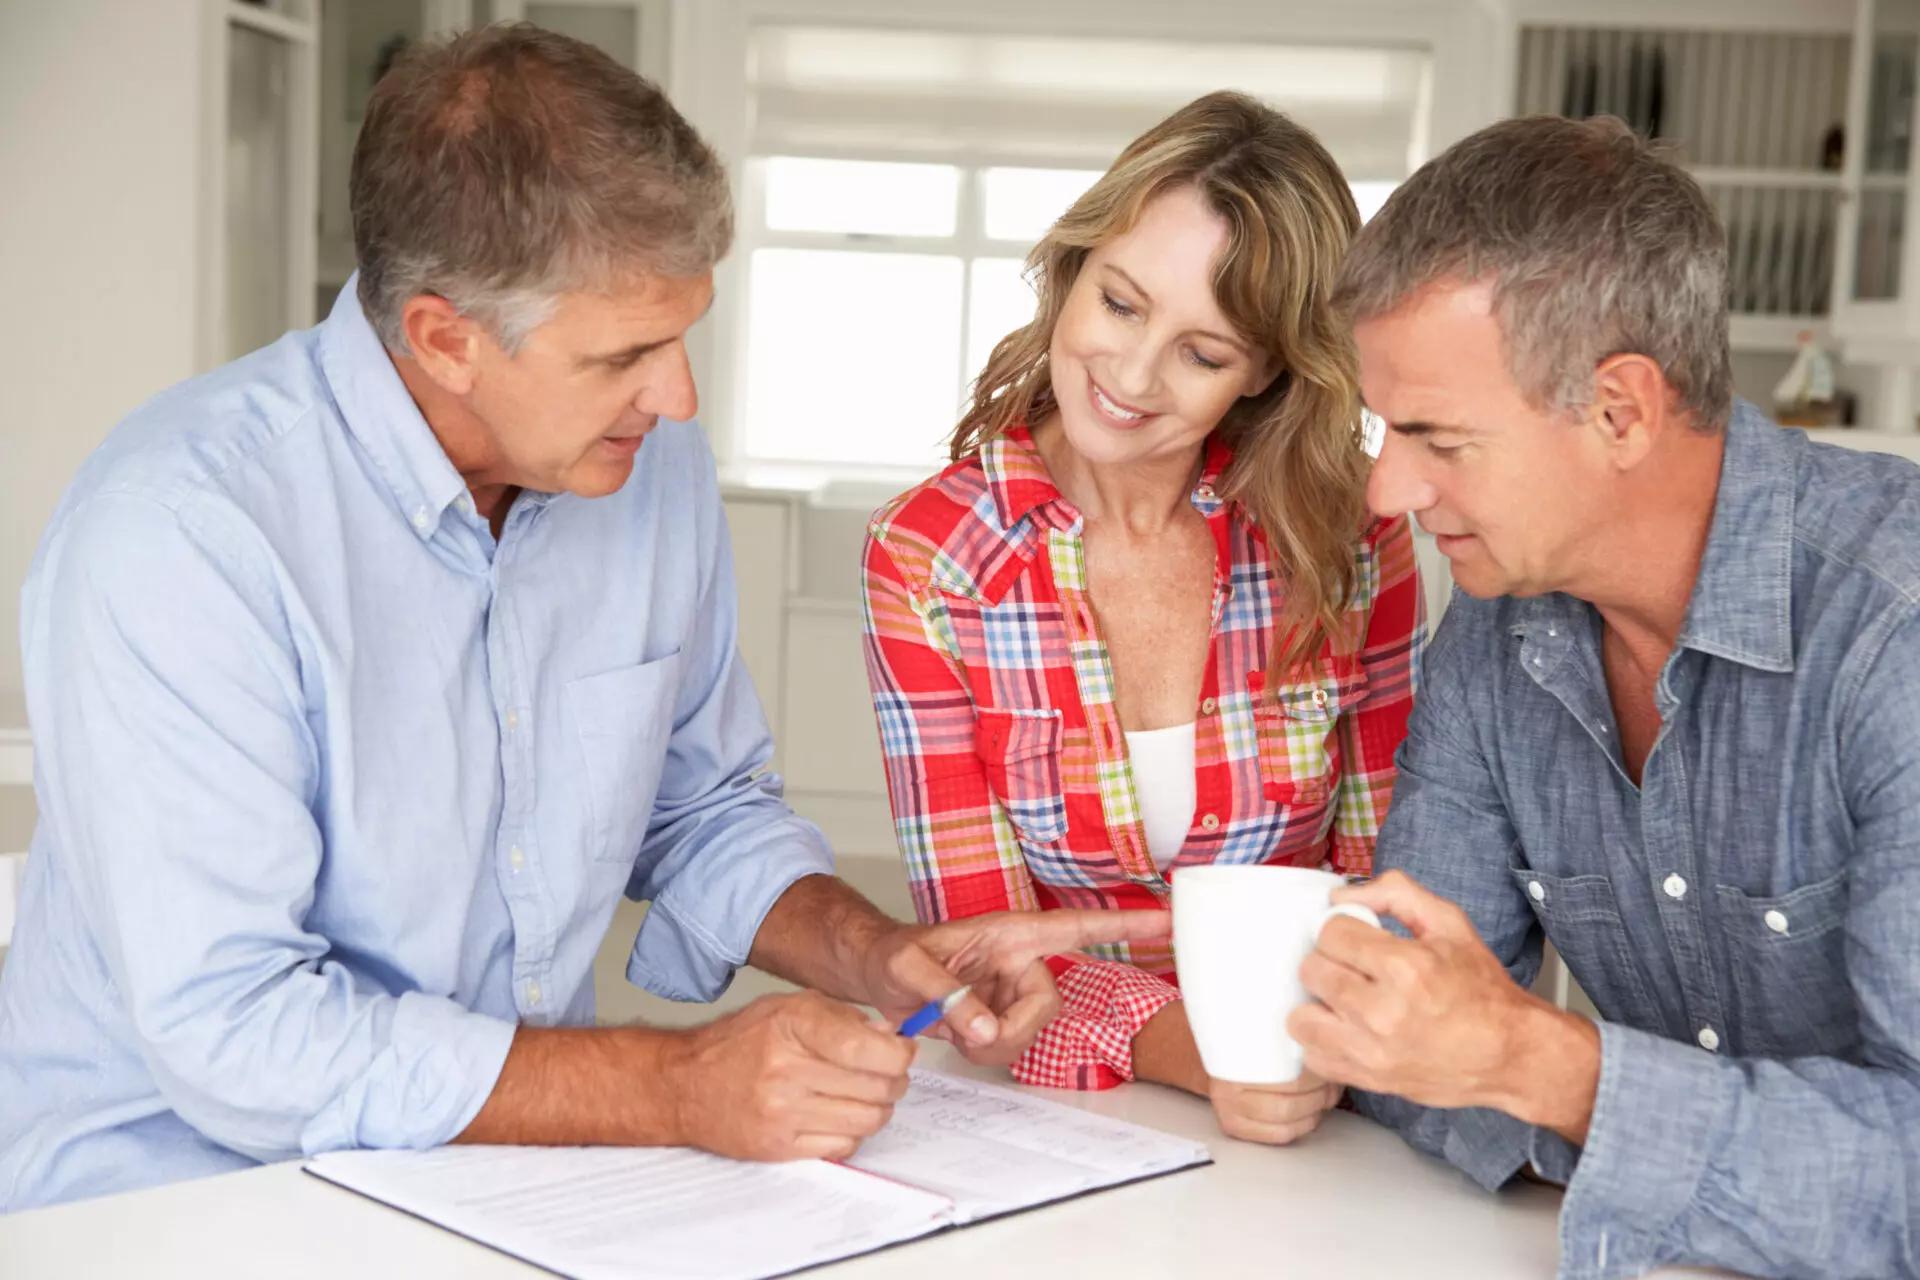 a financial advisor sits with clients to discuss non-cash asset giving